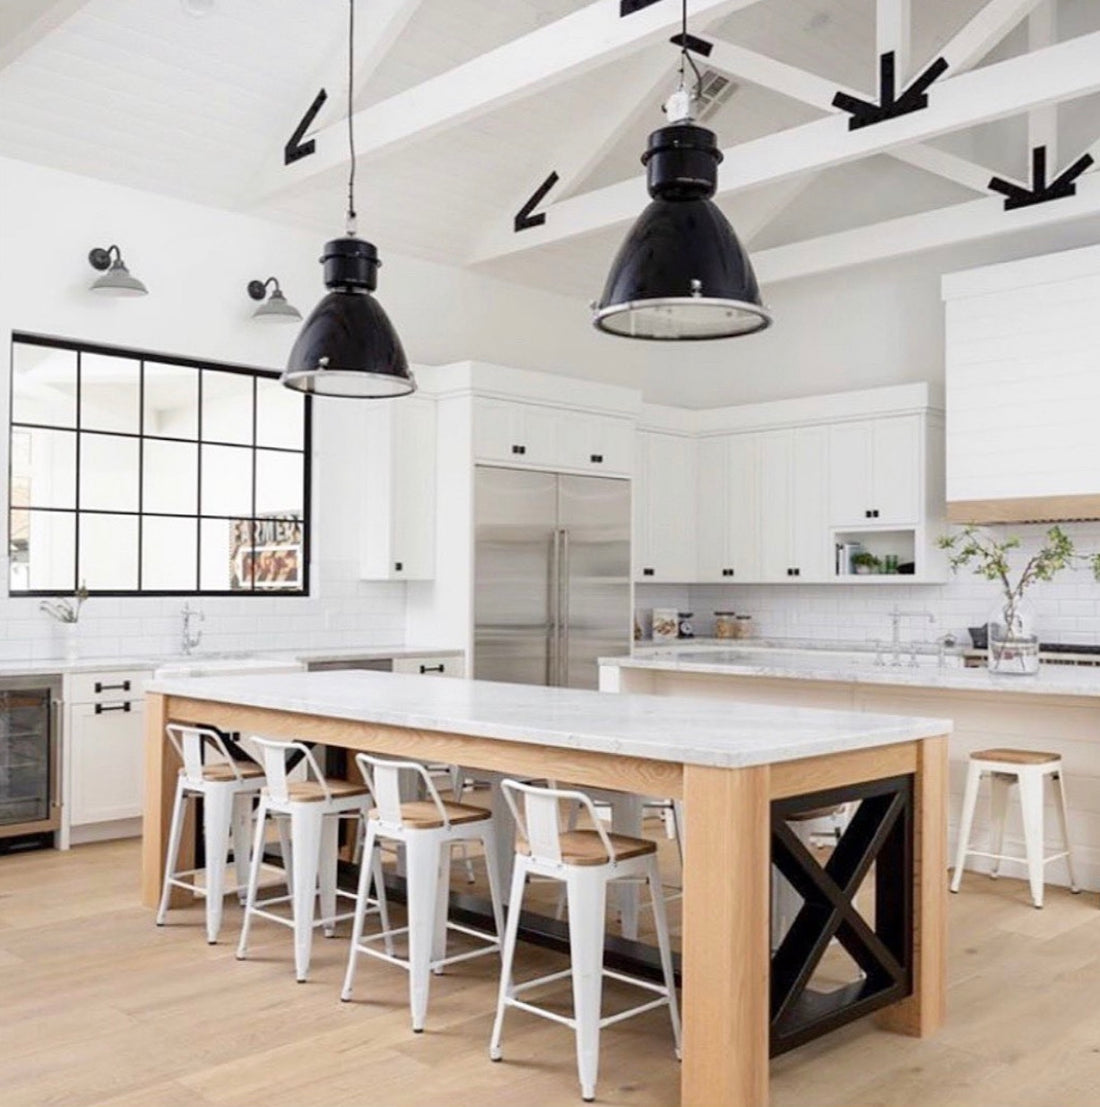 The Art of Mixing Old and New: Incorporating Vintage Industrial Lighting in Modern Interiors